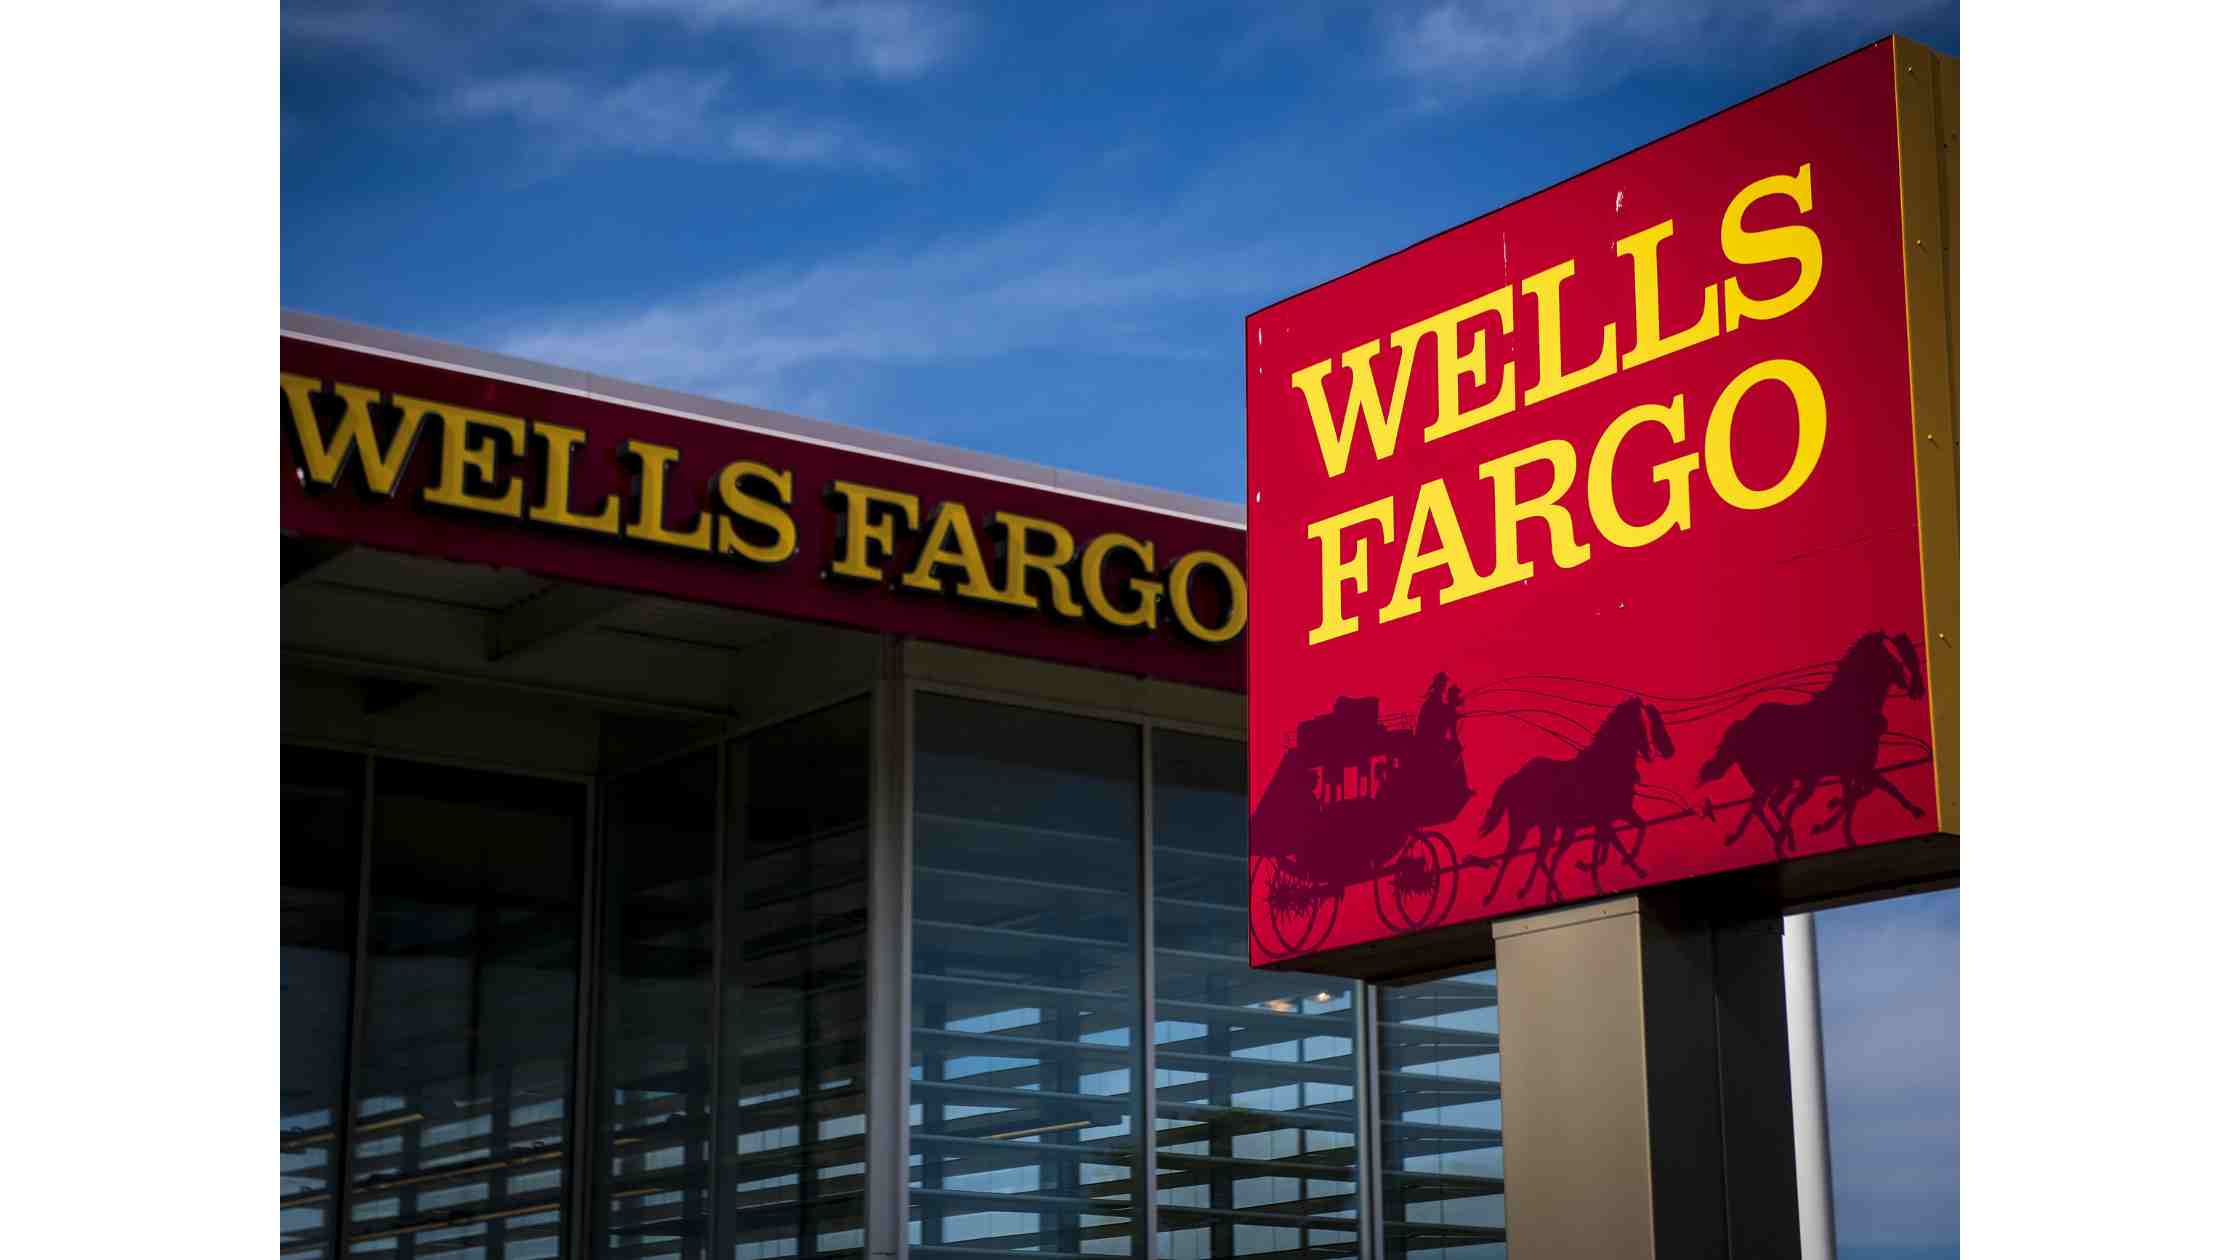 Who bought out Wells Fargo? Leia aqui Who owns Wells Fargo Bank now